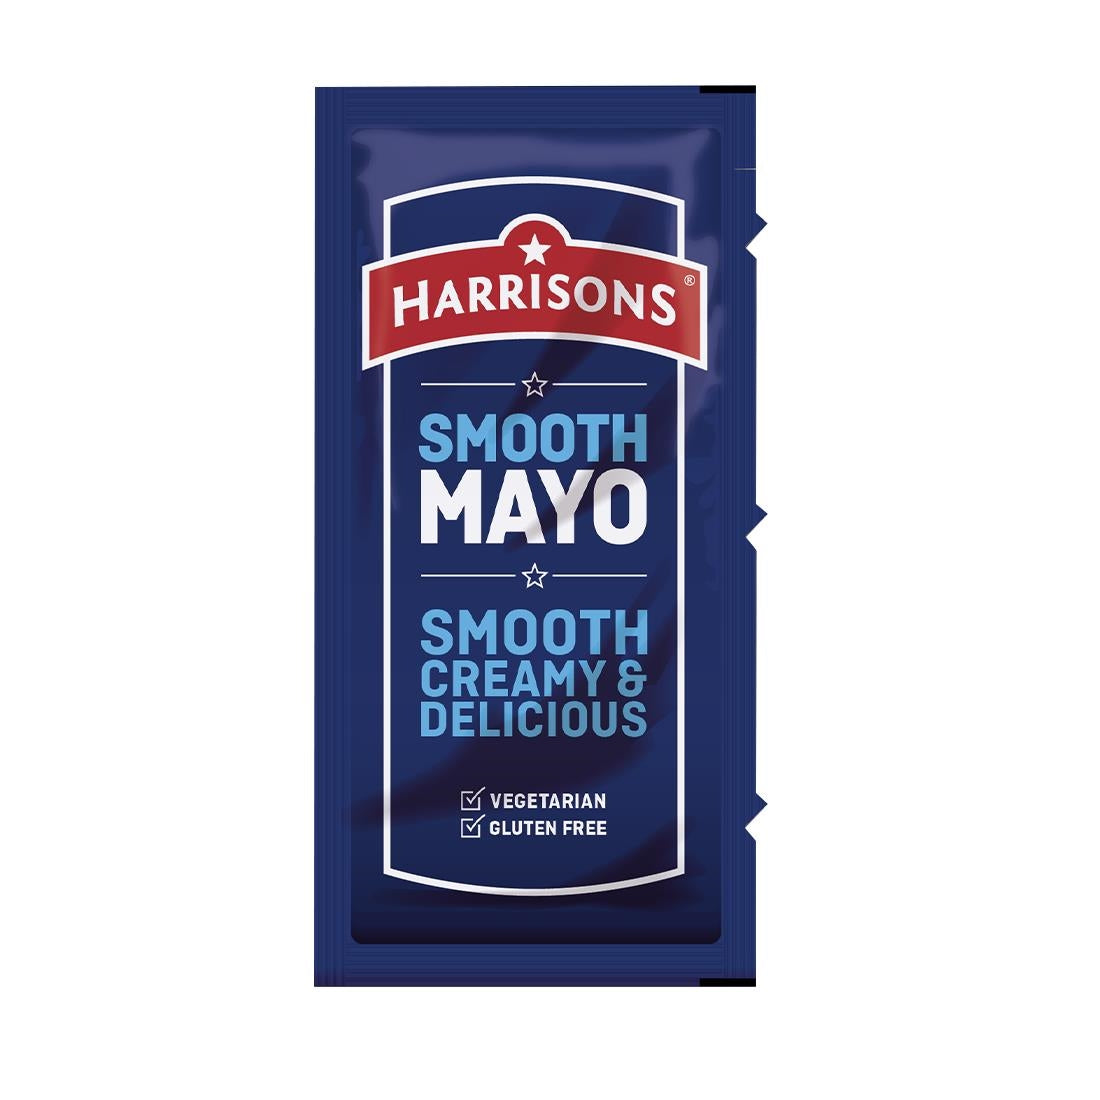 Harrisons Mayonnaise Sachets 10g (Pack of 200)